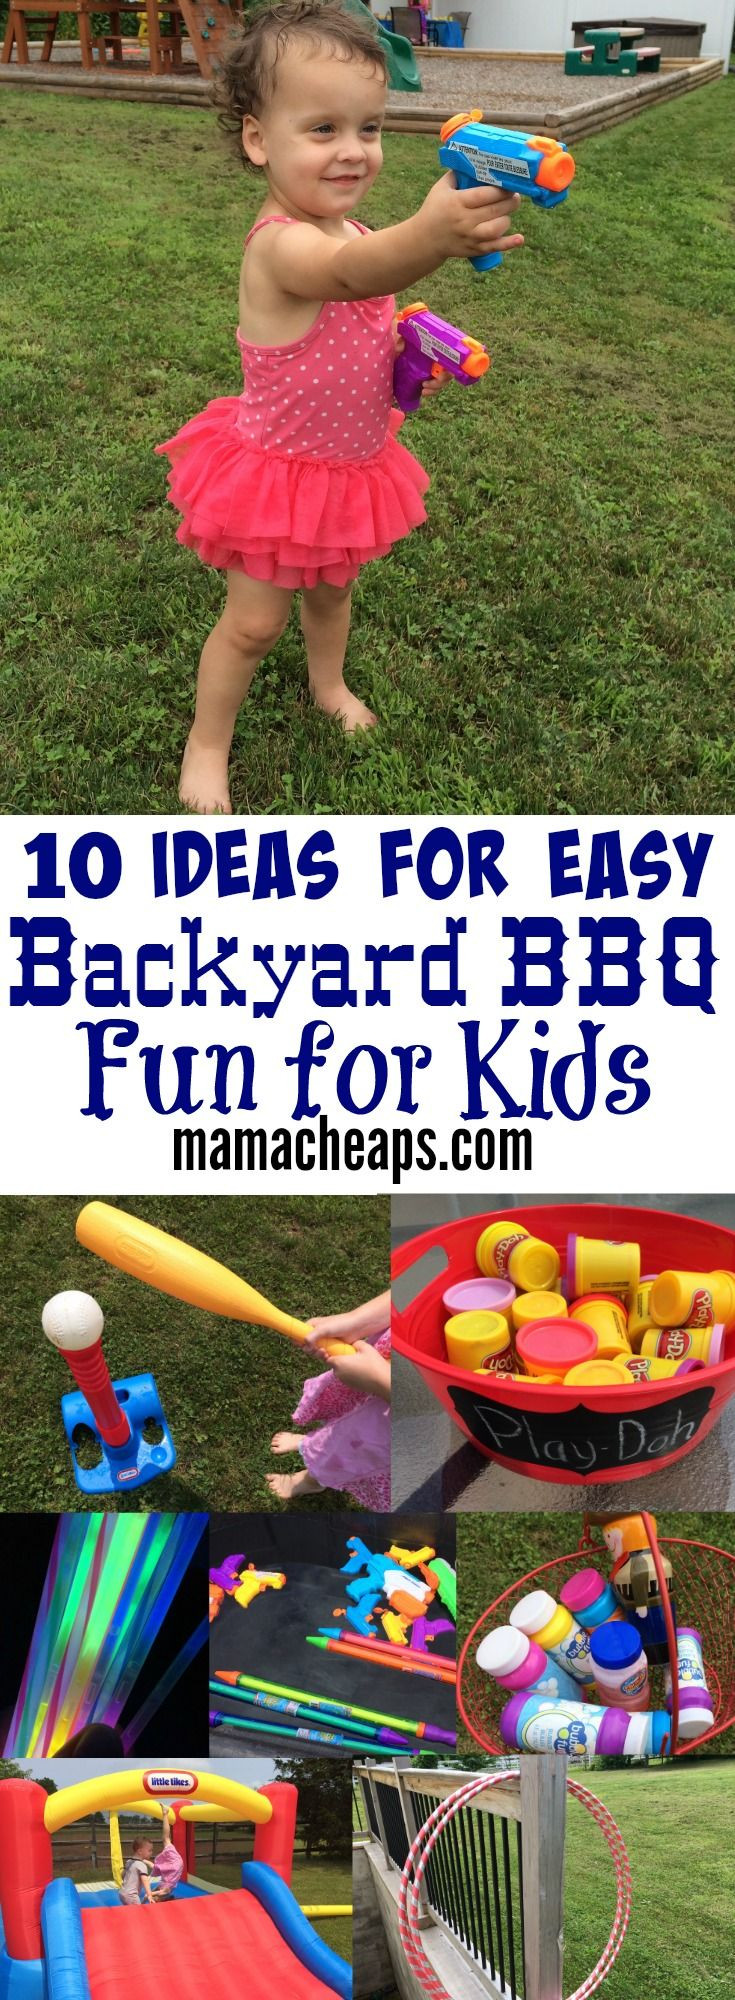 Fun Activities For Kids Birthday Party
 10 Ideas for Easy Backyard BBQ Fun for Kids